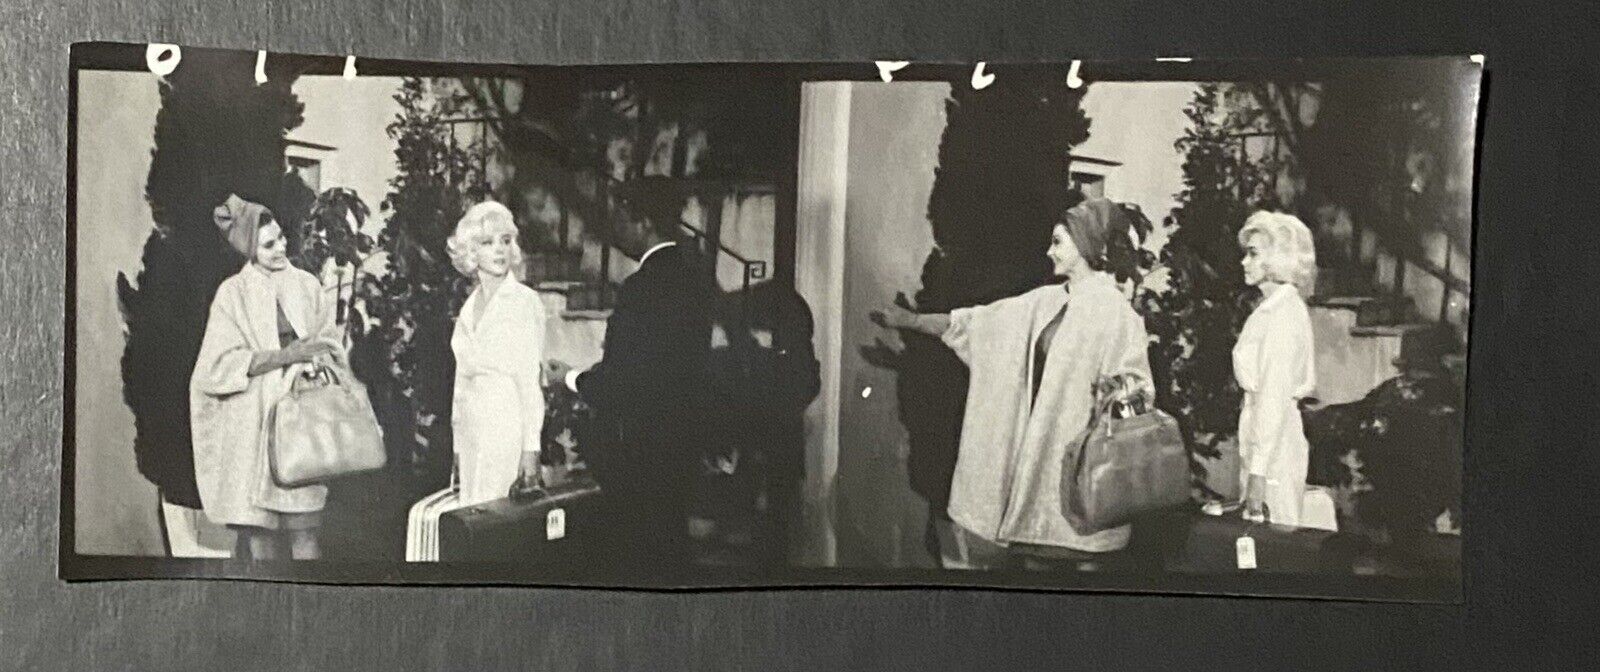 1962 Marilyn Monroe Original Photo Something’s Got To Give Other Woman Contact